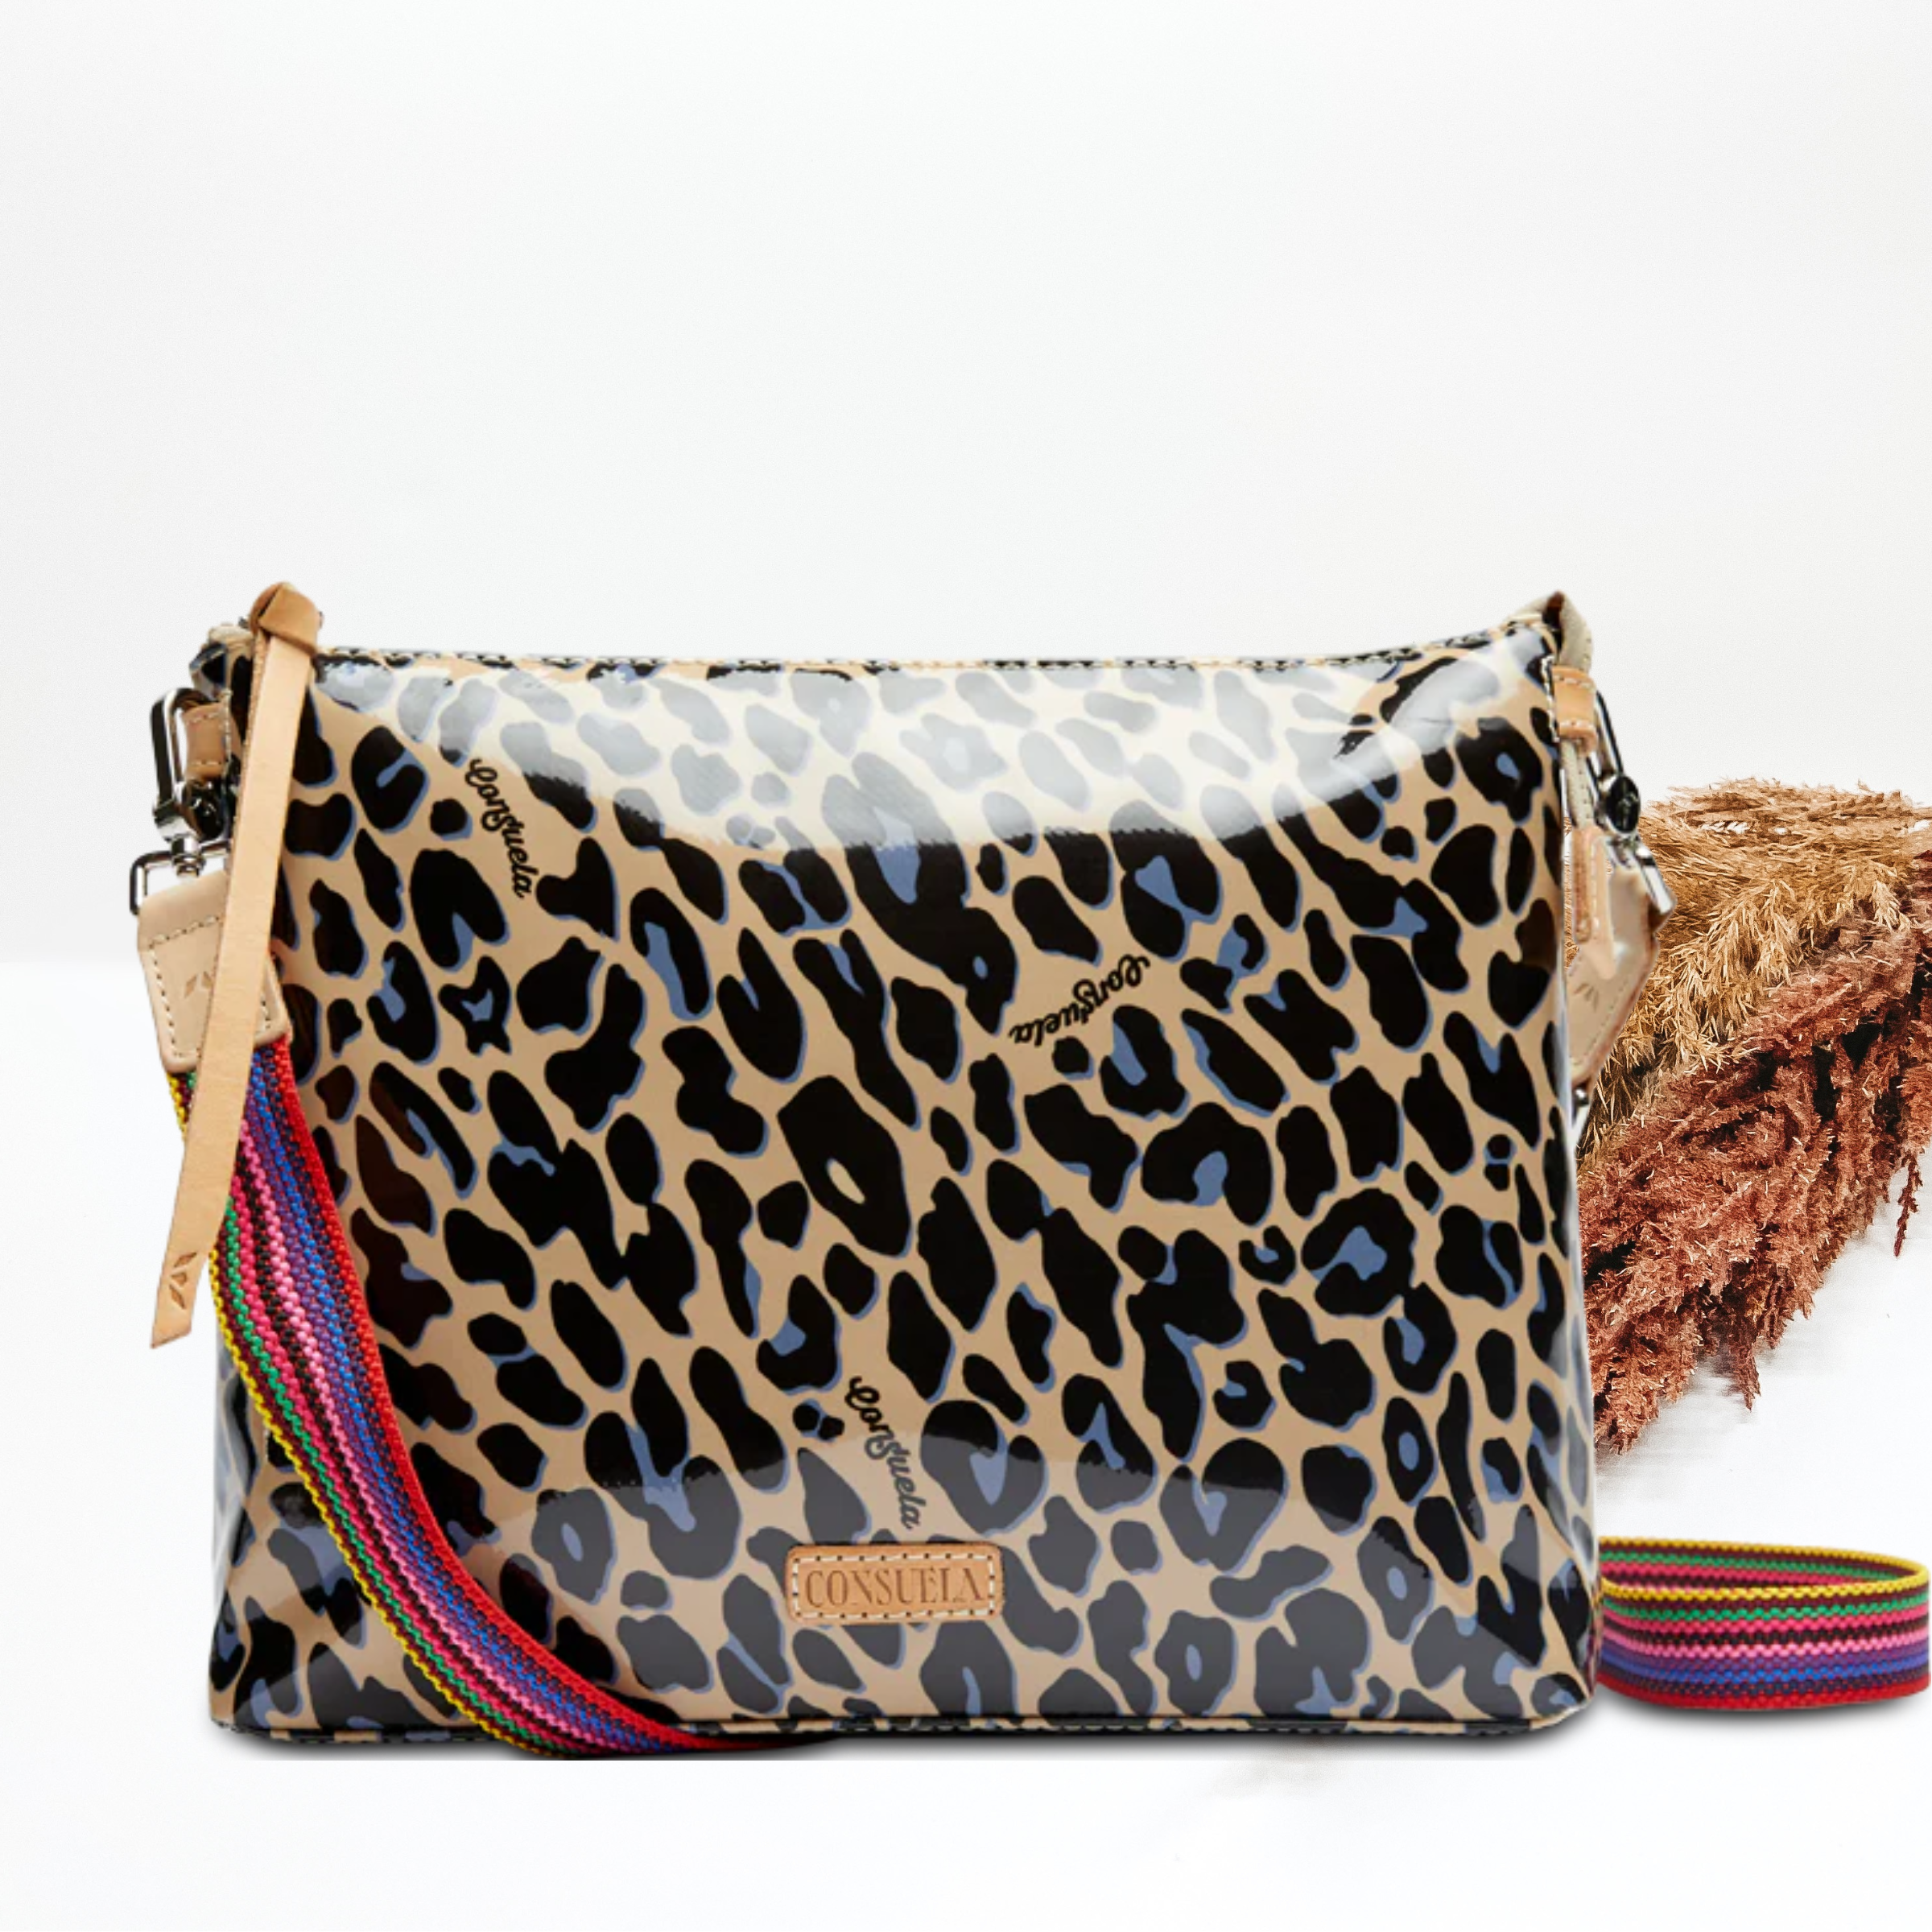 A leopard print purse with a crossbody strap. Pictured on white background with brown pompous grass on the right side. 